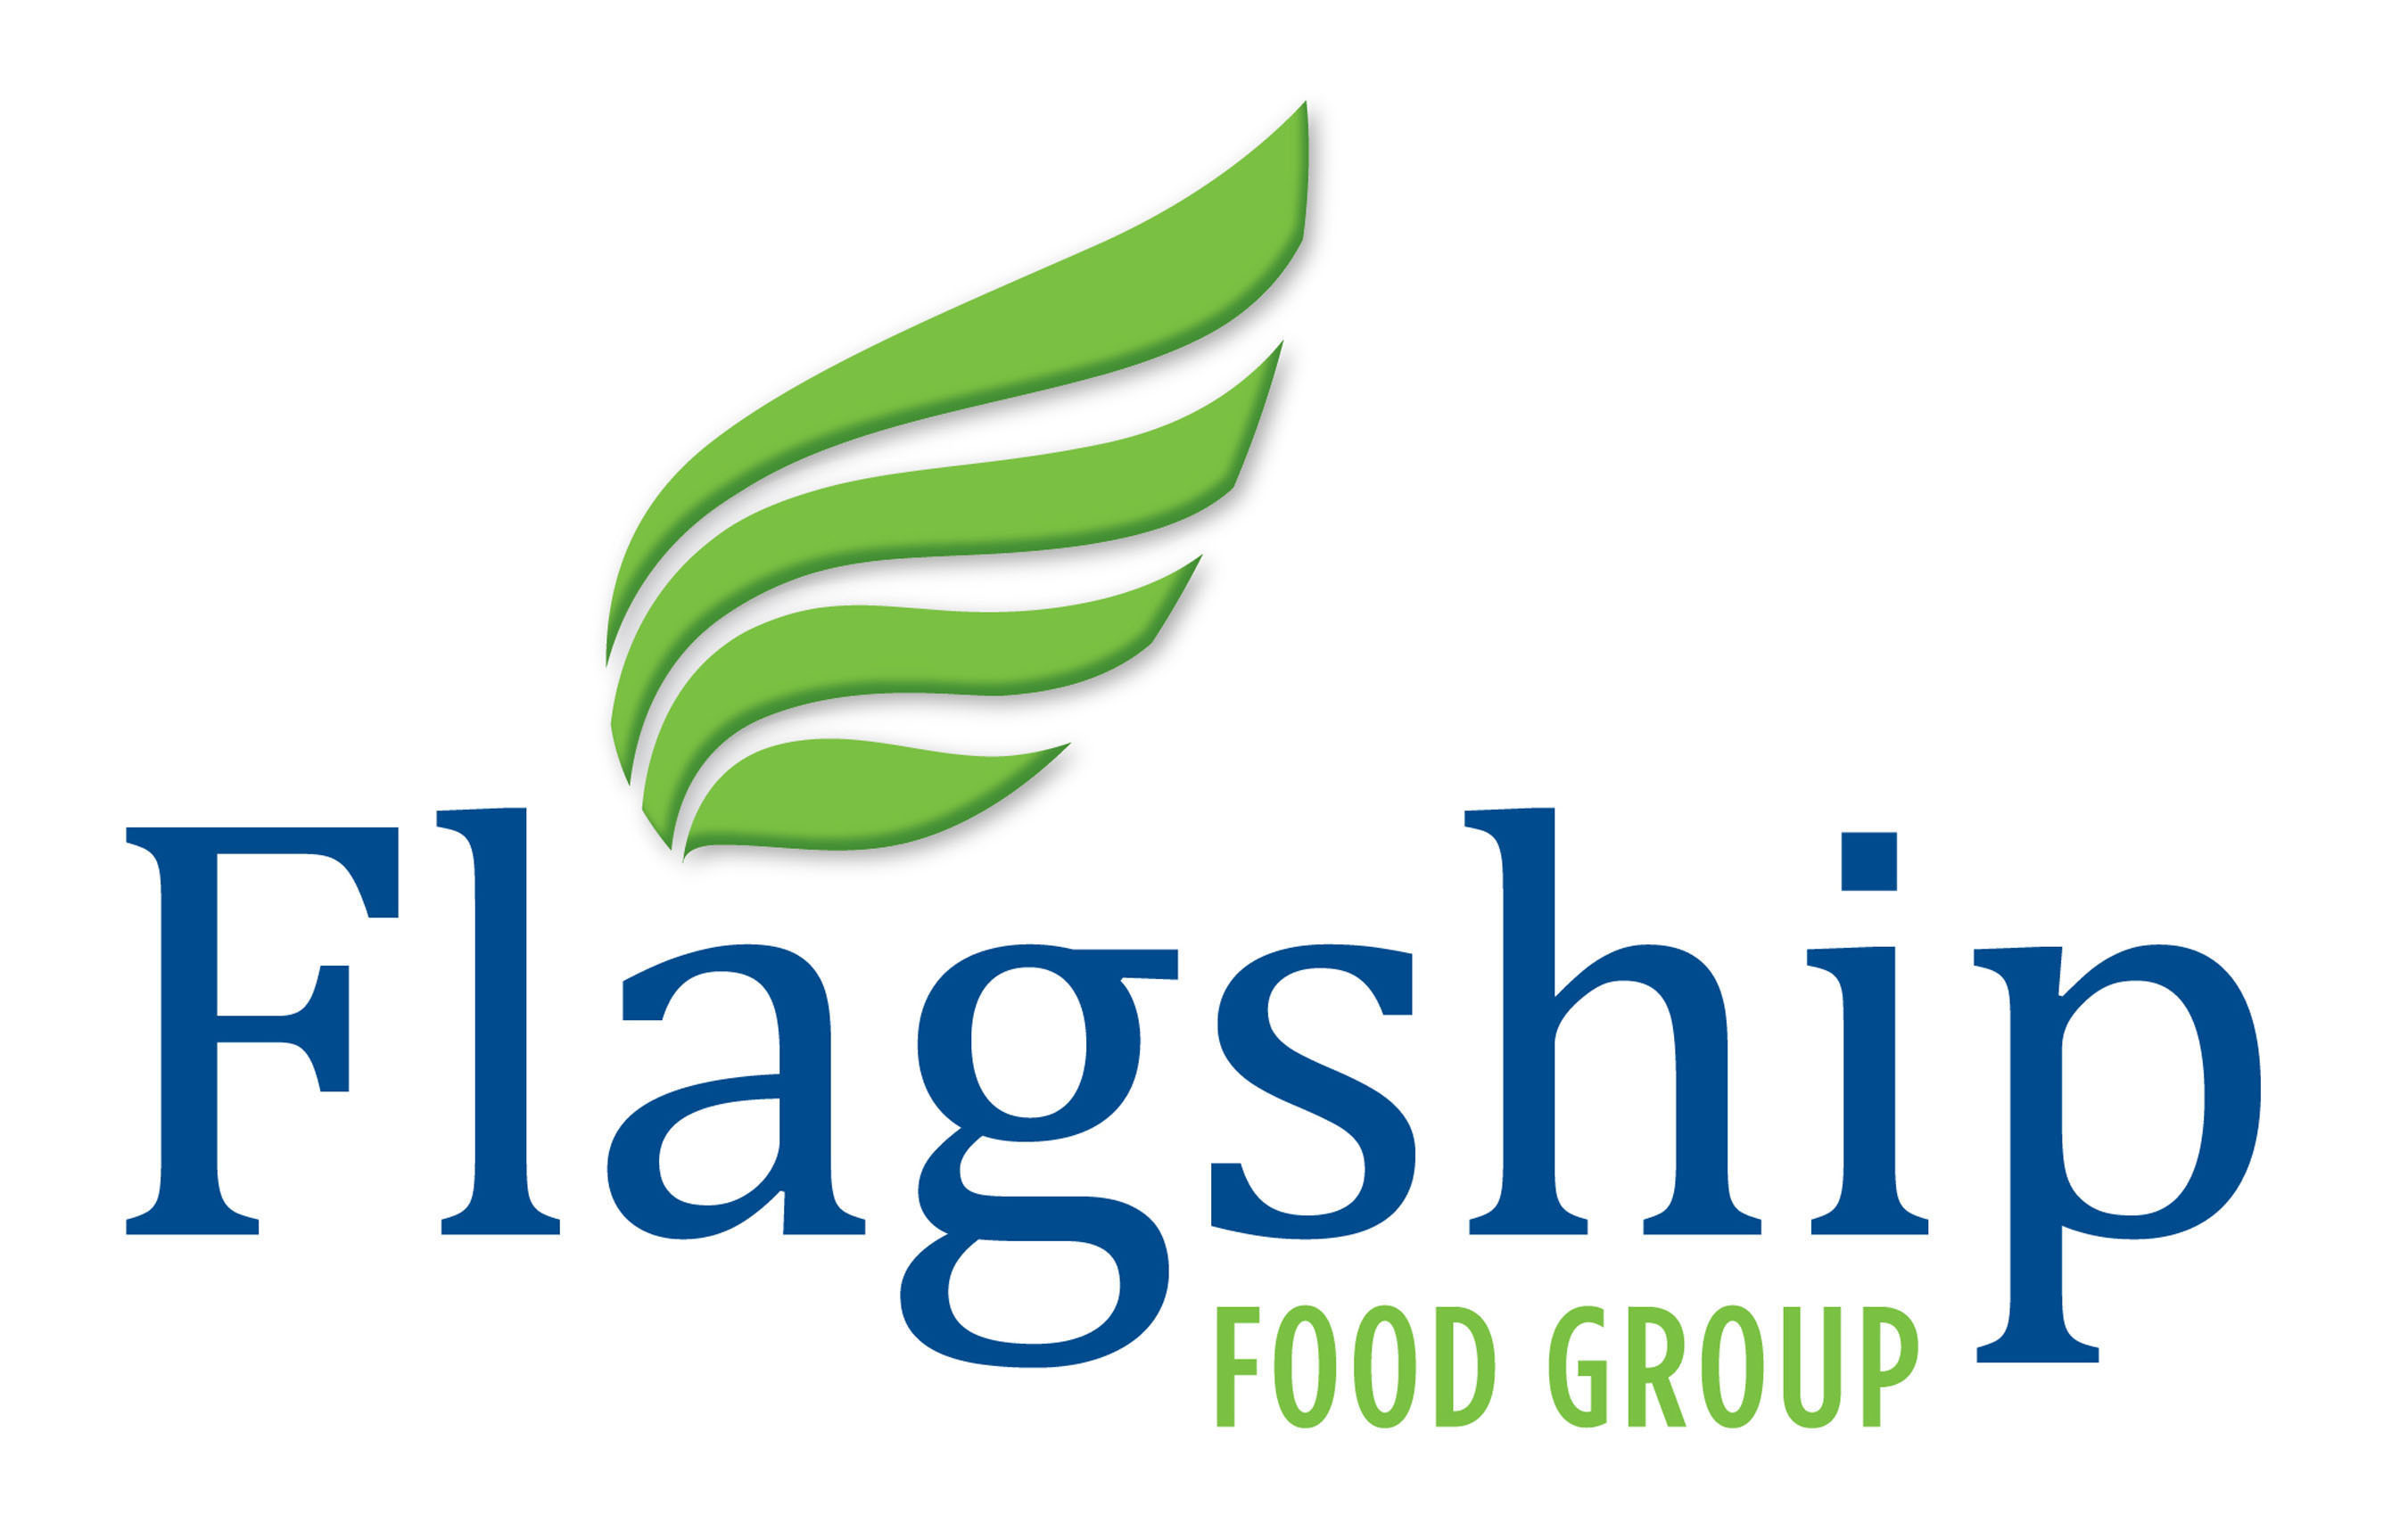 Flagship Food Group is a global, diversified food company serving some of the world's leading and most highly regarded retail, grocery, food service, and food-related organizations. (PRNewsFoto/Flagship Food Group) (PRNewsFoto/)